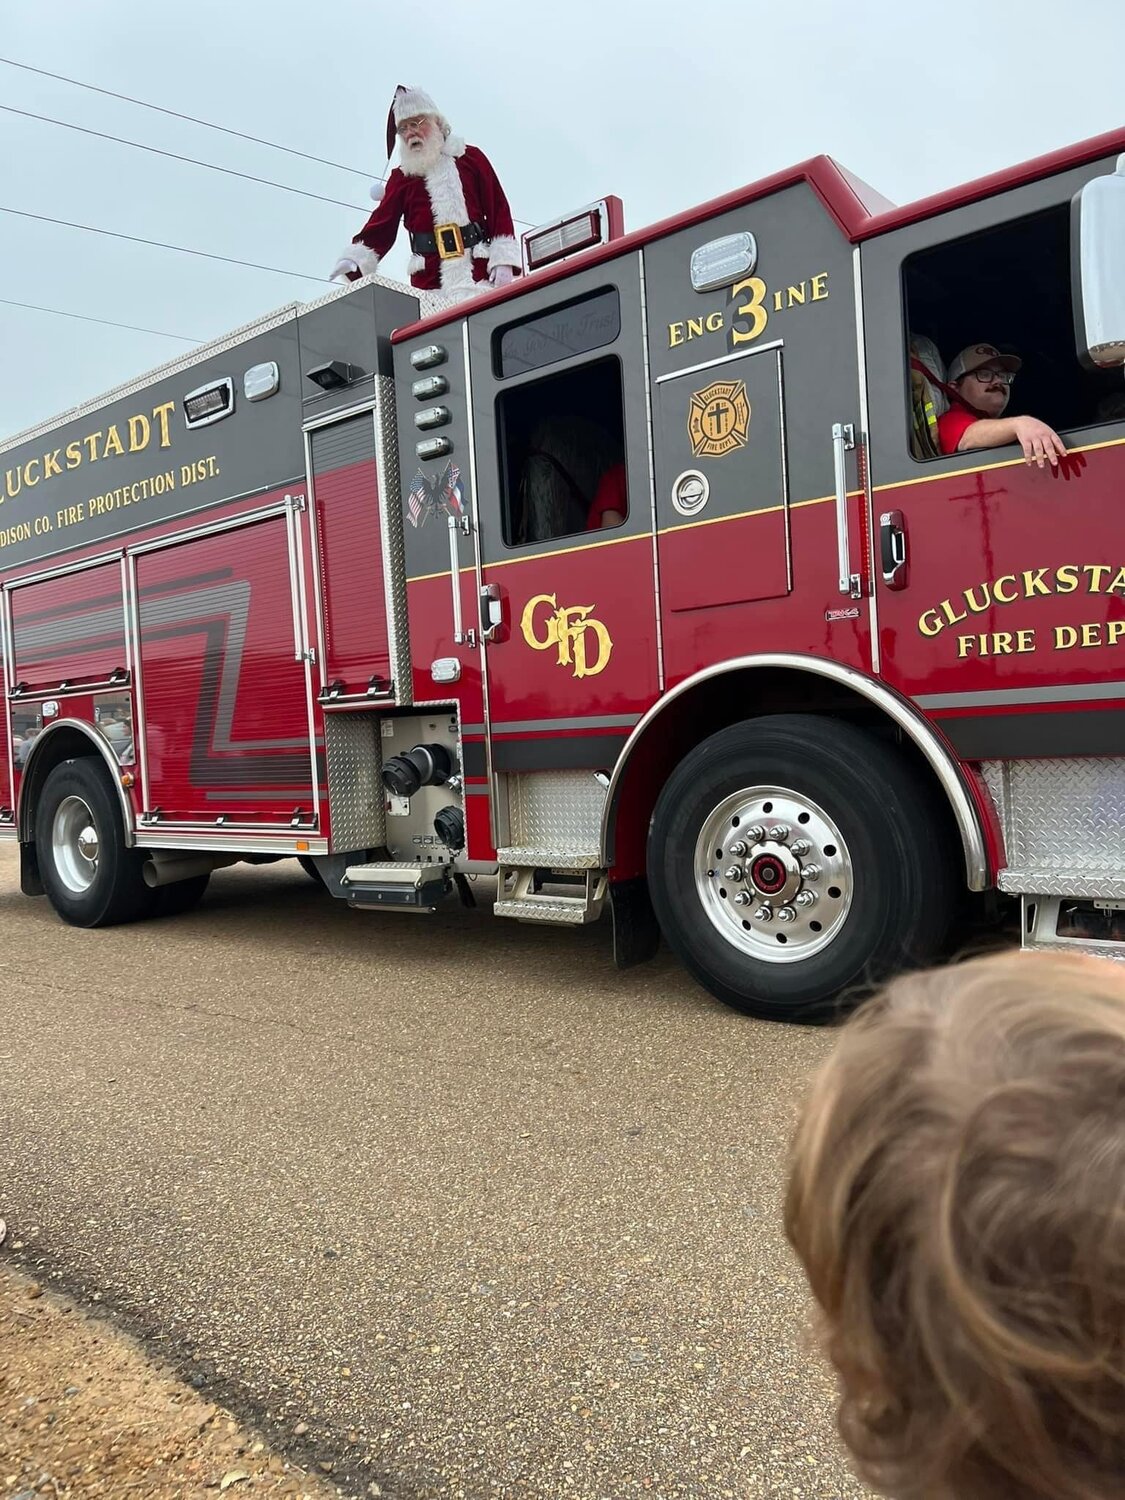 Santa Claus made a special appearance at the 2022 Gluckstadt Christmas Parade, riding with the Gluckstadt Fire Department.